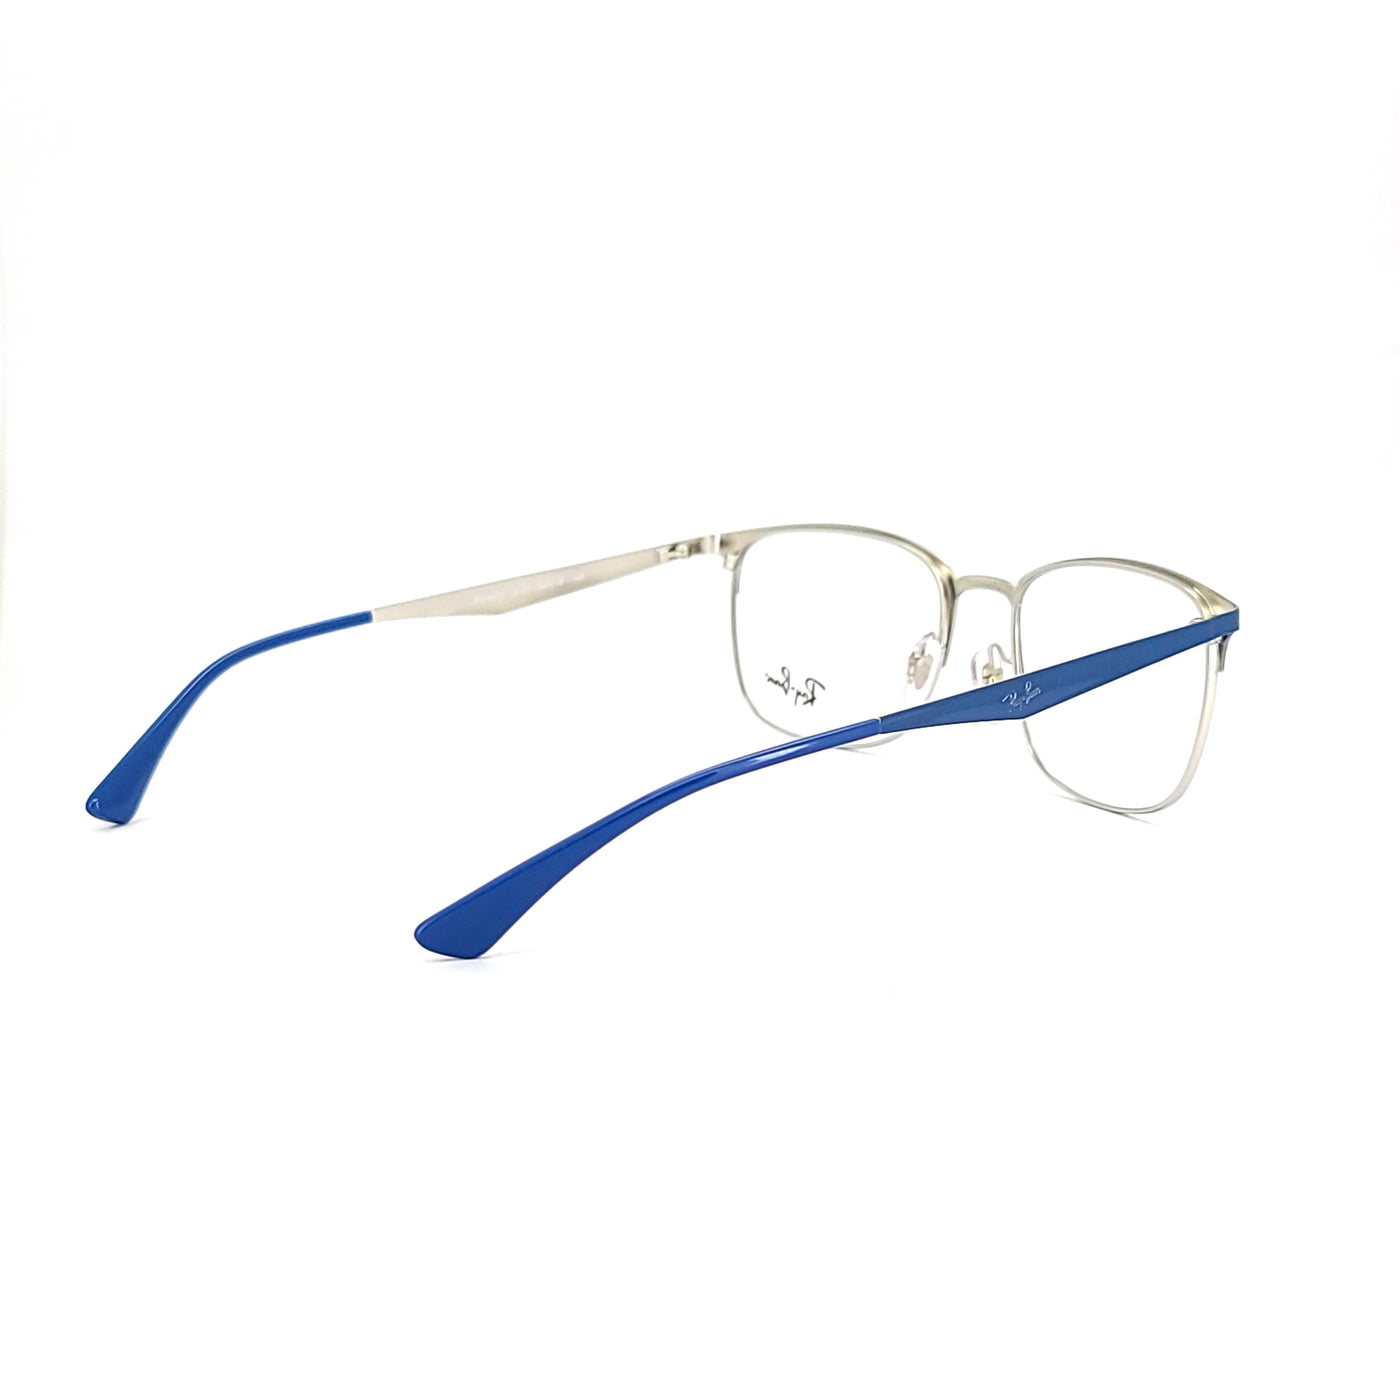 Ray-Ban Highstreet RB6421/3101_54 | Eyeglasses - Vision Express Optical Philippines